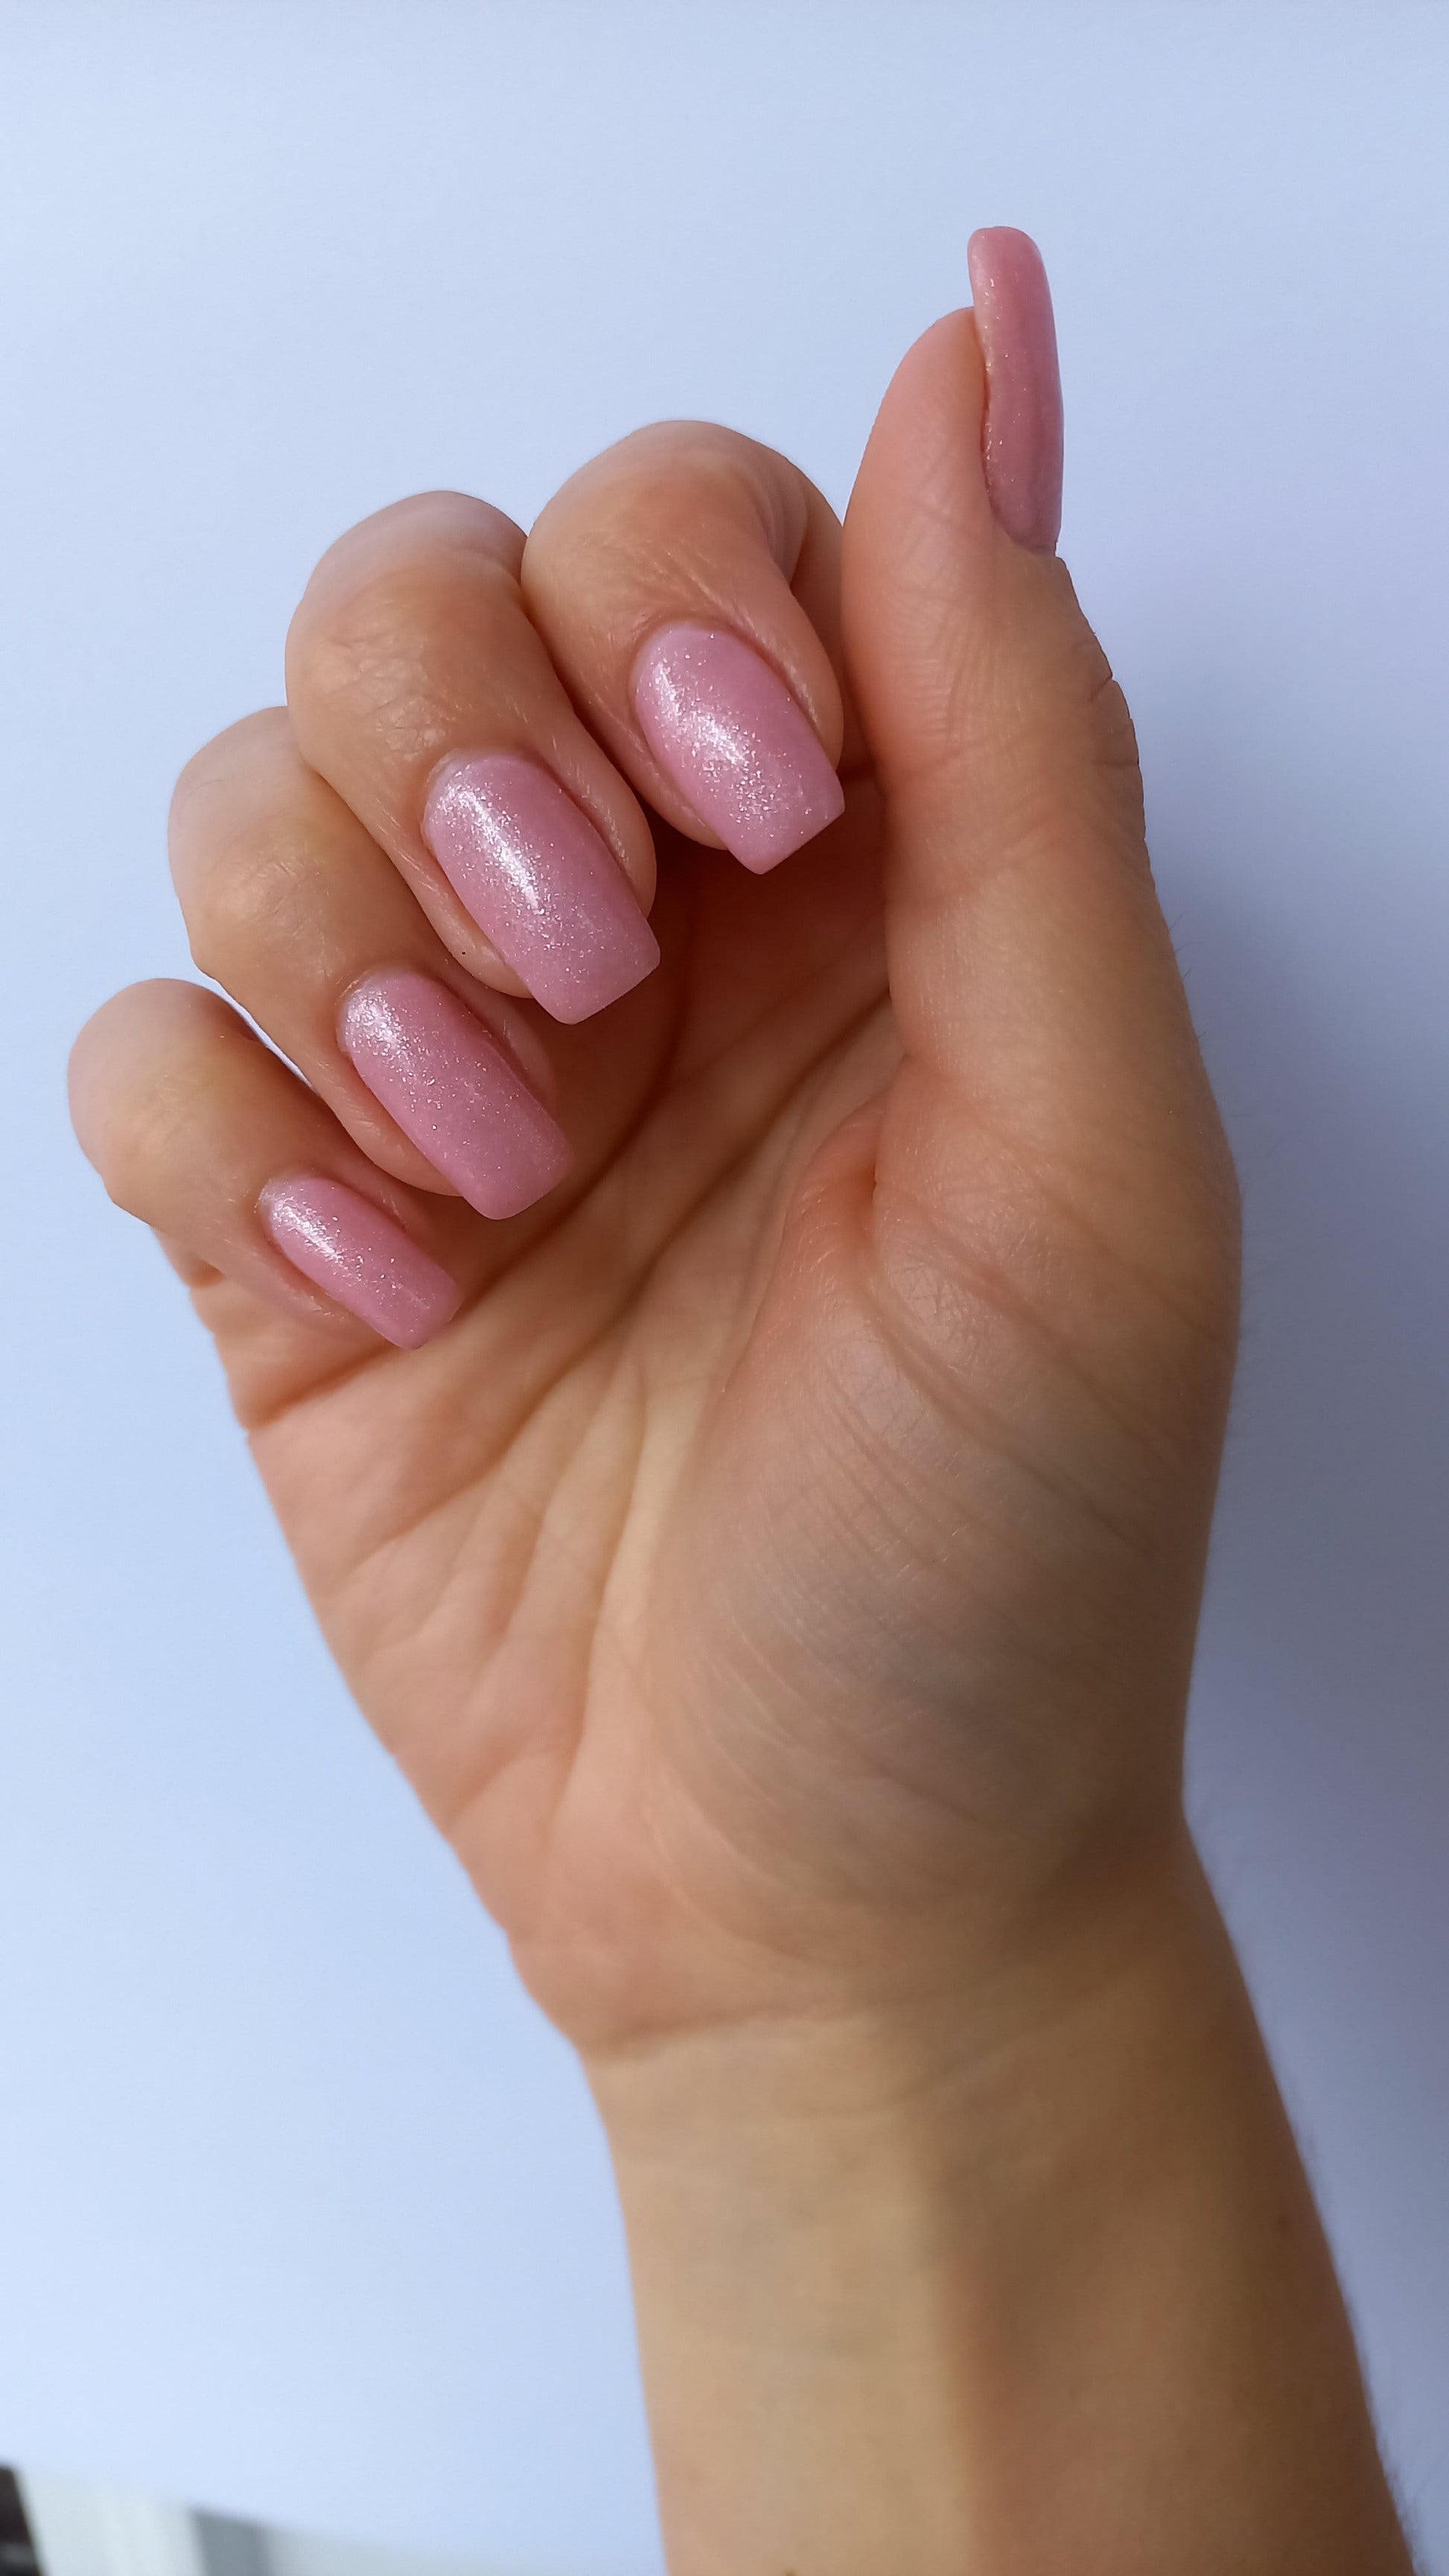 Manicured with Heavenly Pink Cally Gel Nail Polish